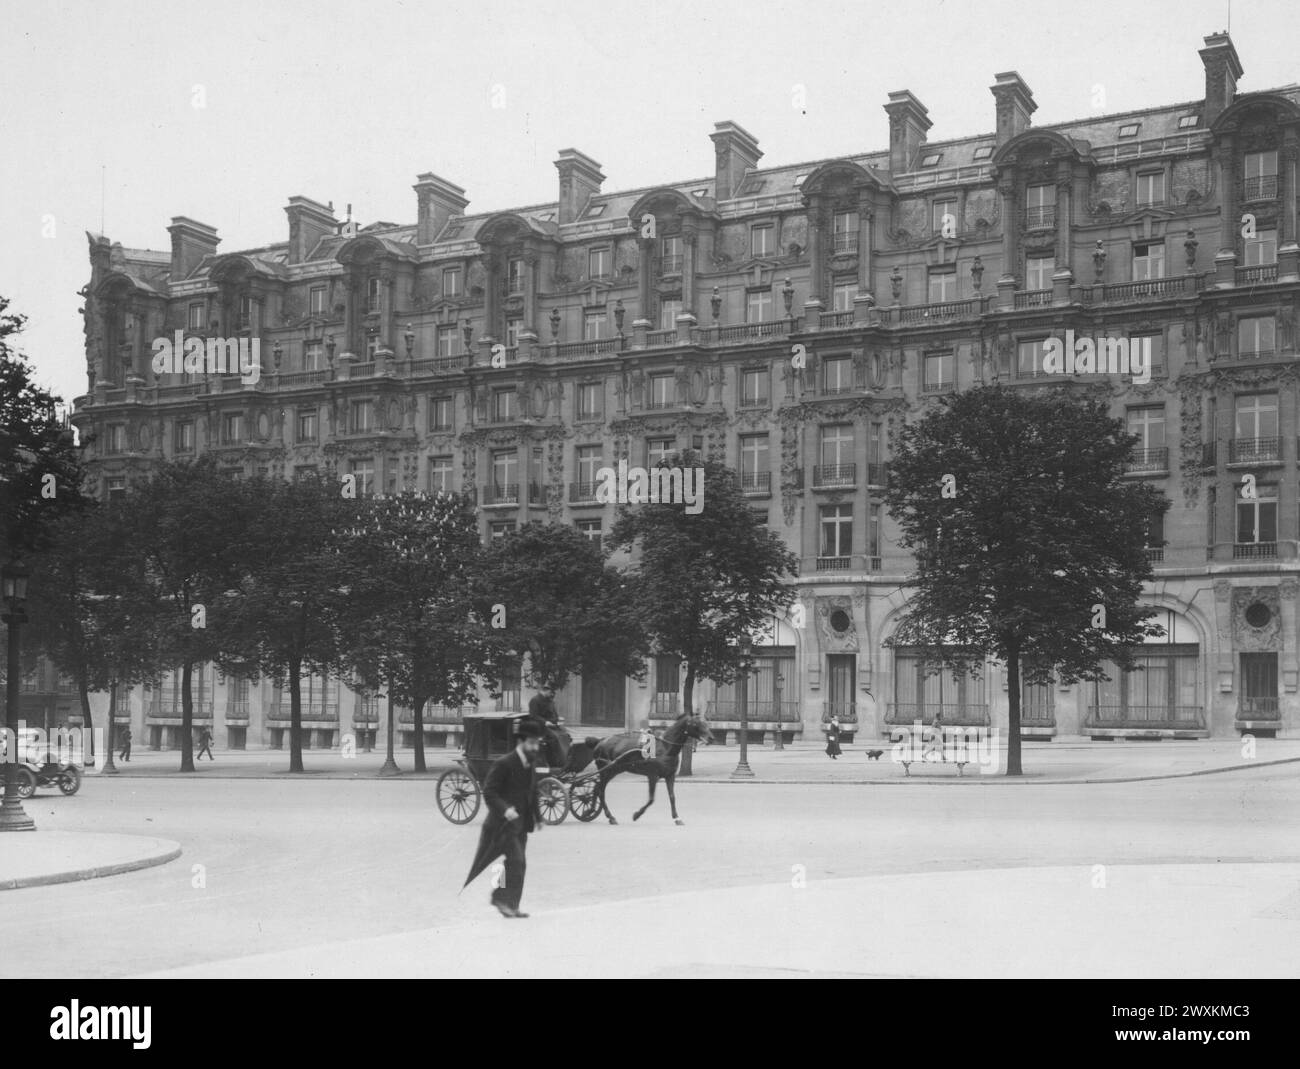 Elysee Palace Hotel, front view from the Avenue des Champs Elysees, Paris France ca. 1918 Stock Photo